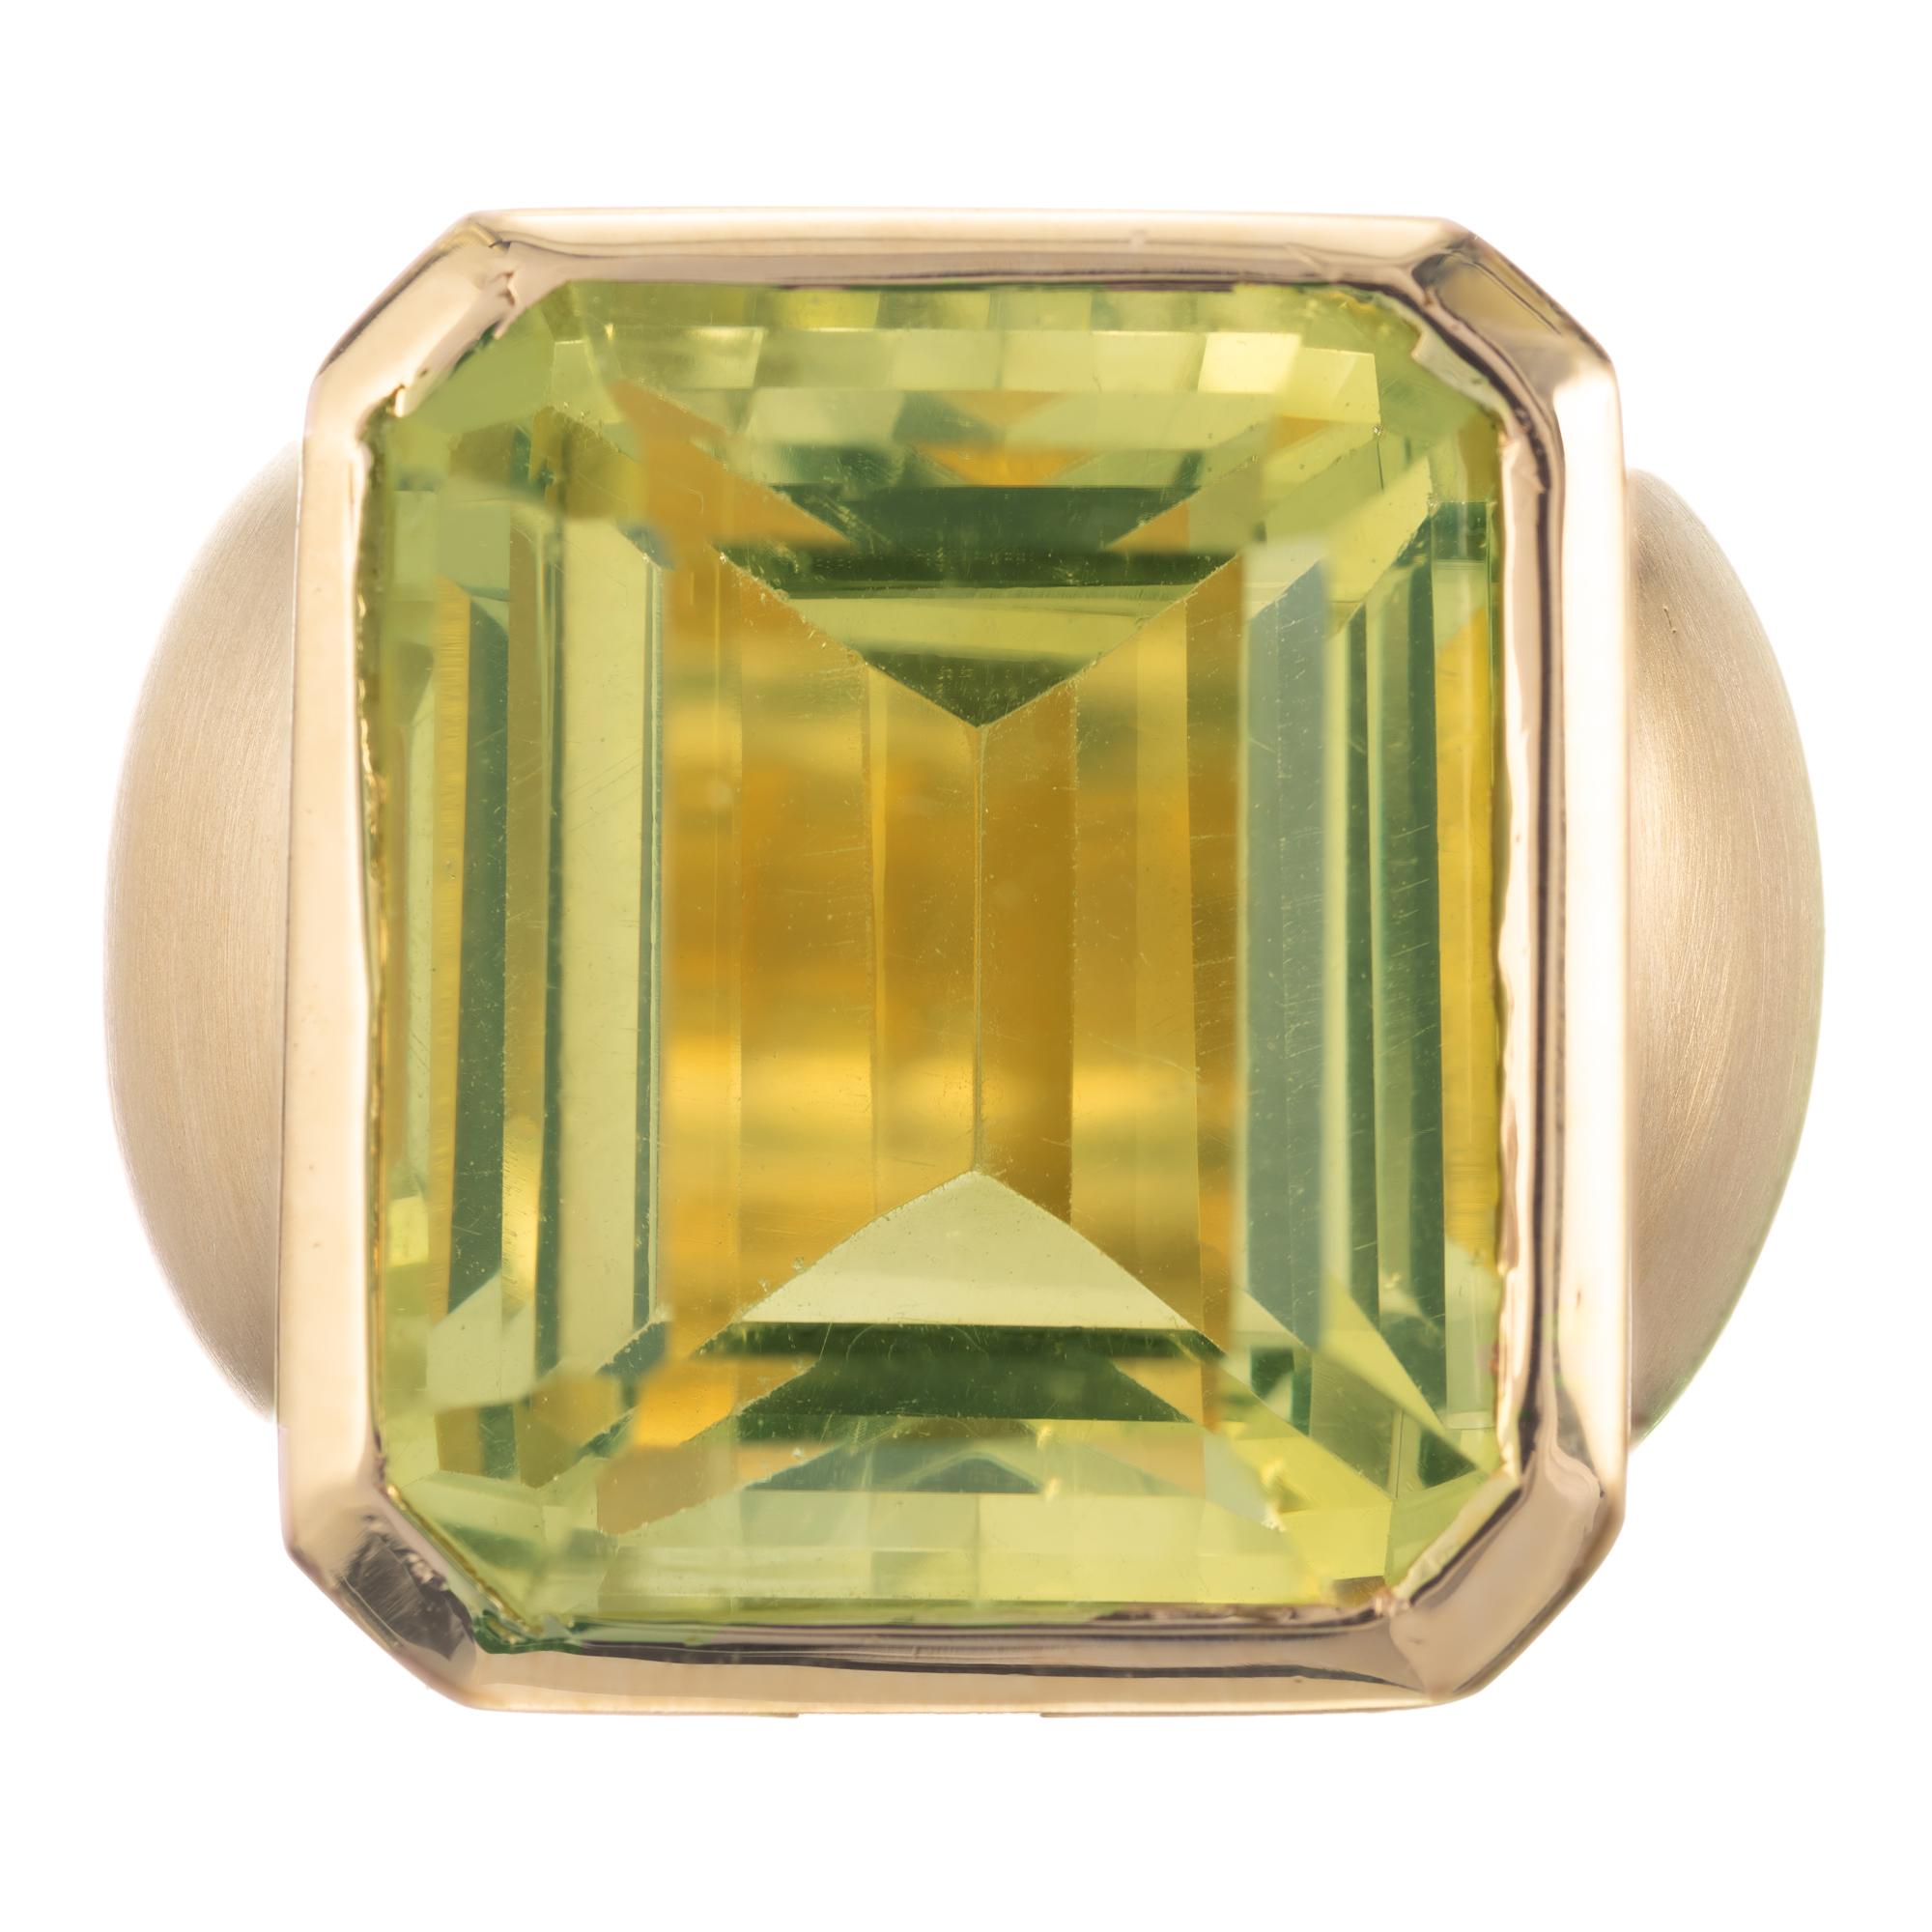 Heavy solid 18k yellow gold ring with a bright green yellow Prasiolite Quartz in a wide bezel set brushed finish ring with a row of bead set diamonds on the side. 

One 19.5 x 16 x 11mm Prasiolite light green Quartz, approx. total weight 20.00cts
40